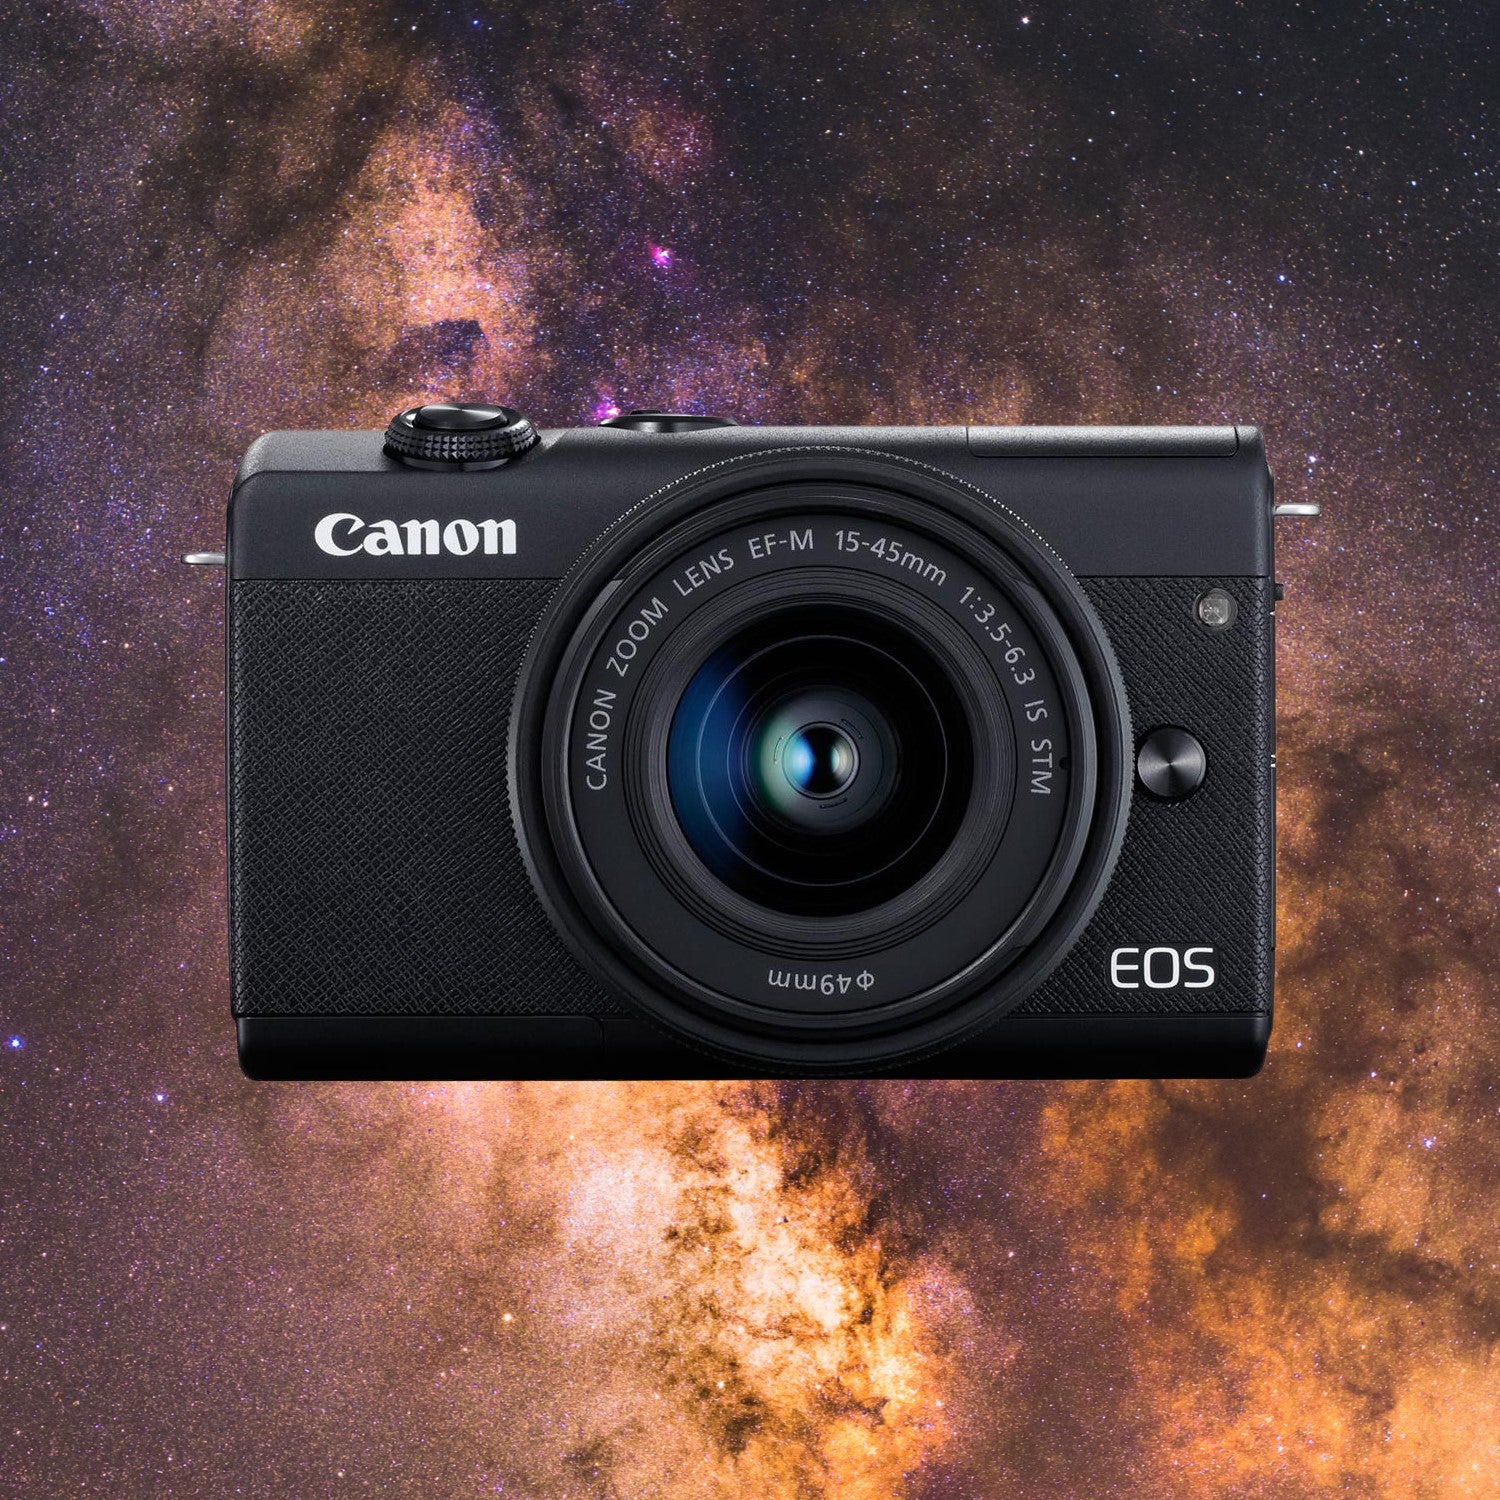 Astro-Mirrorless Canon EOS M200 with EF-M 15-45mm IS STM Lens